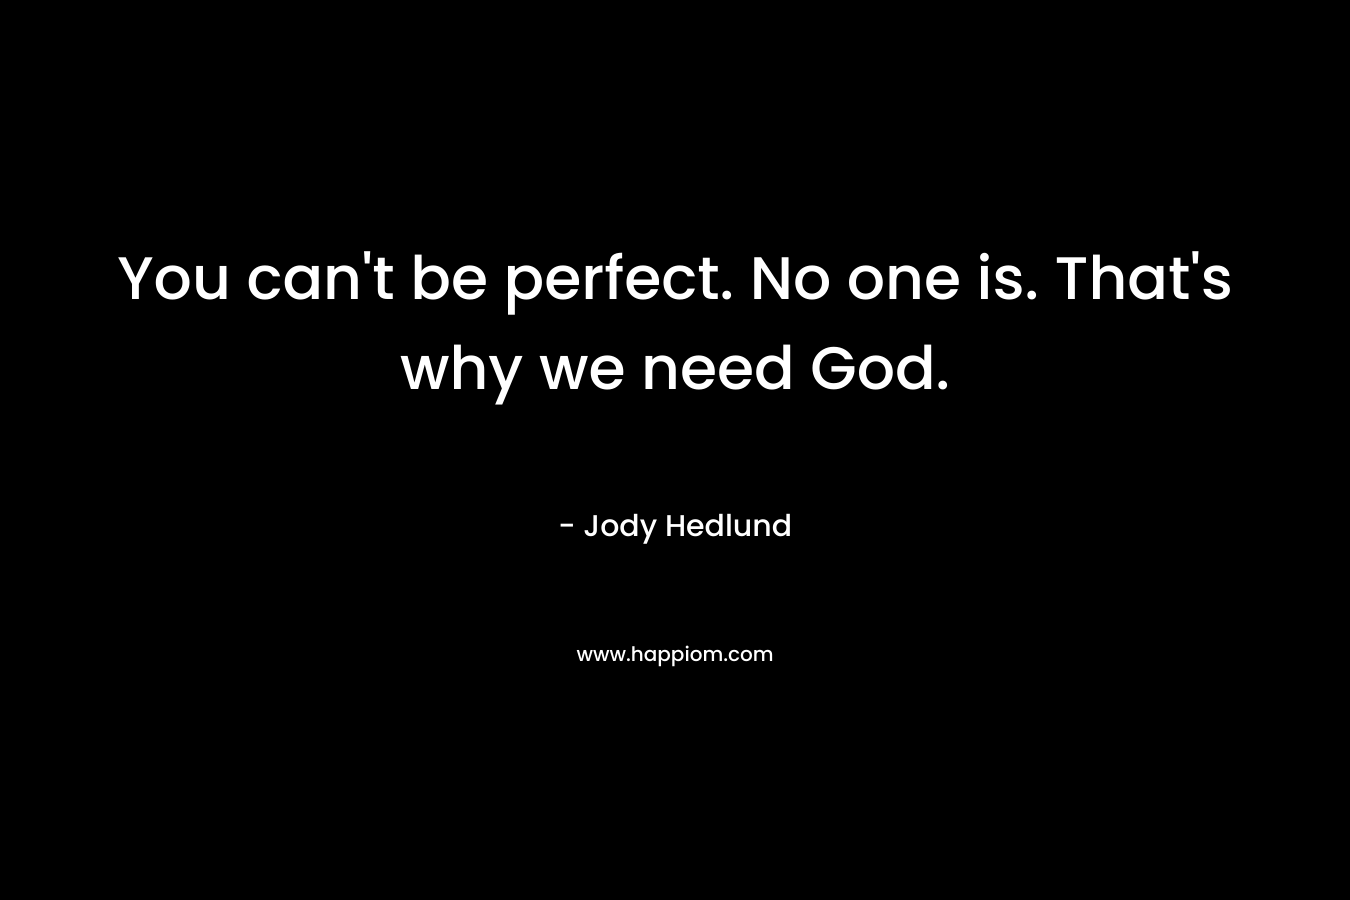 You can’t be perfect. No one is. That’s why we need God. – Jody Hedlund